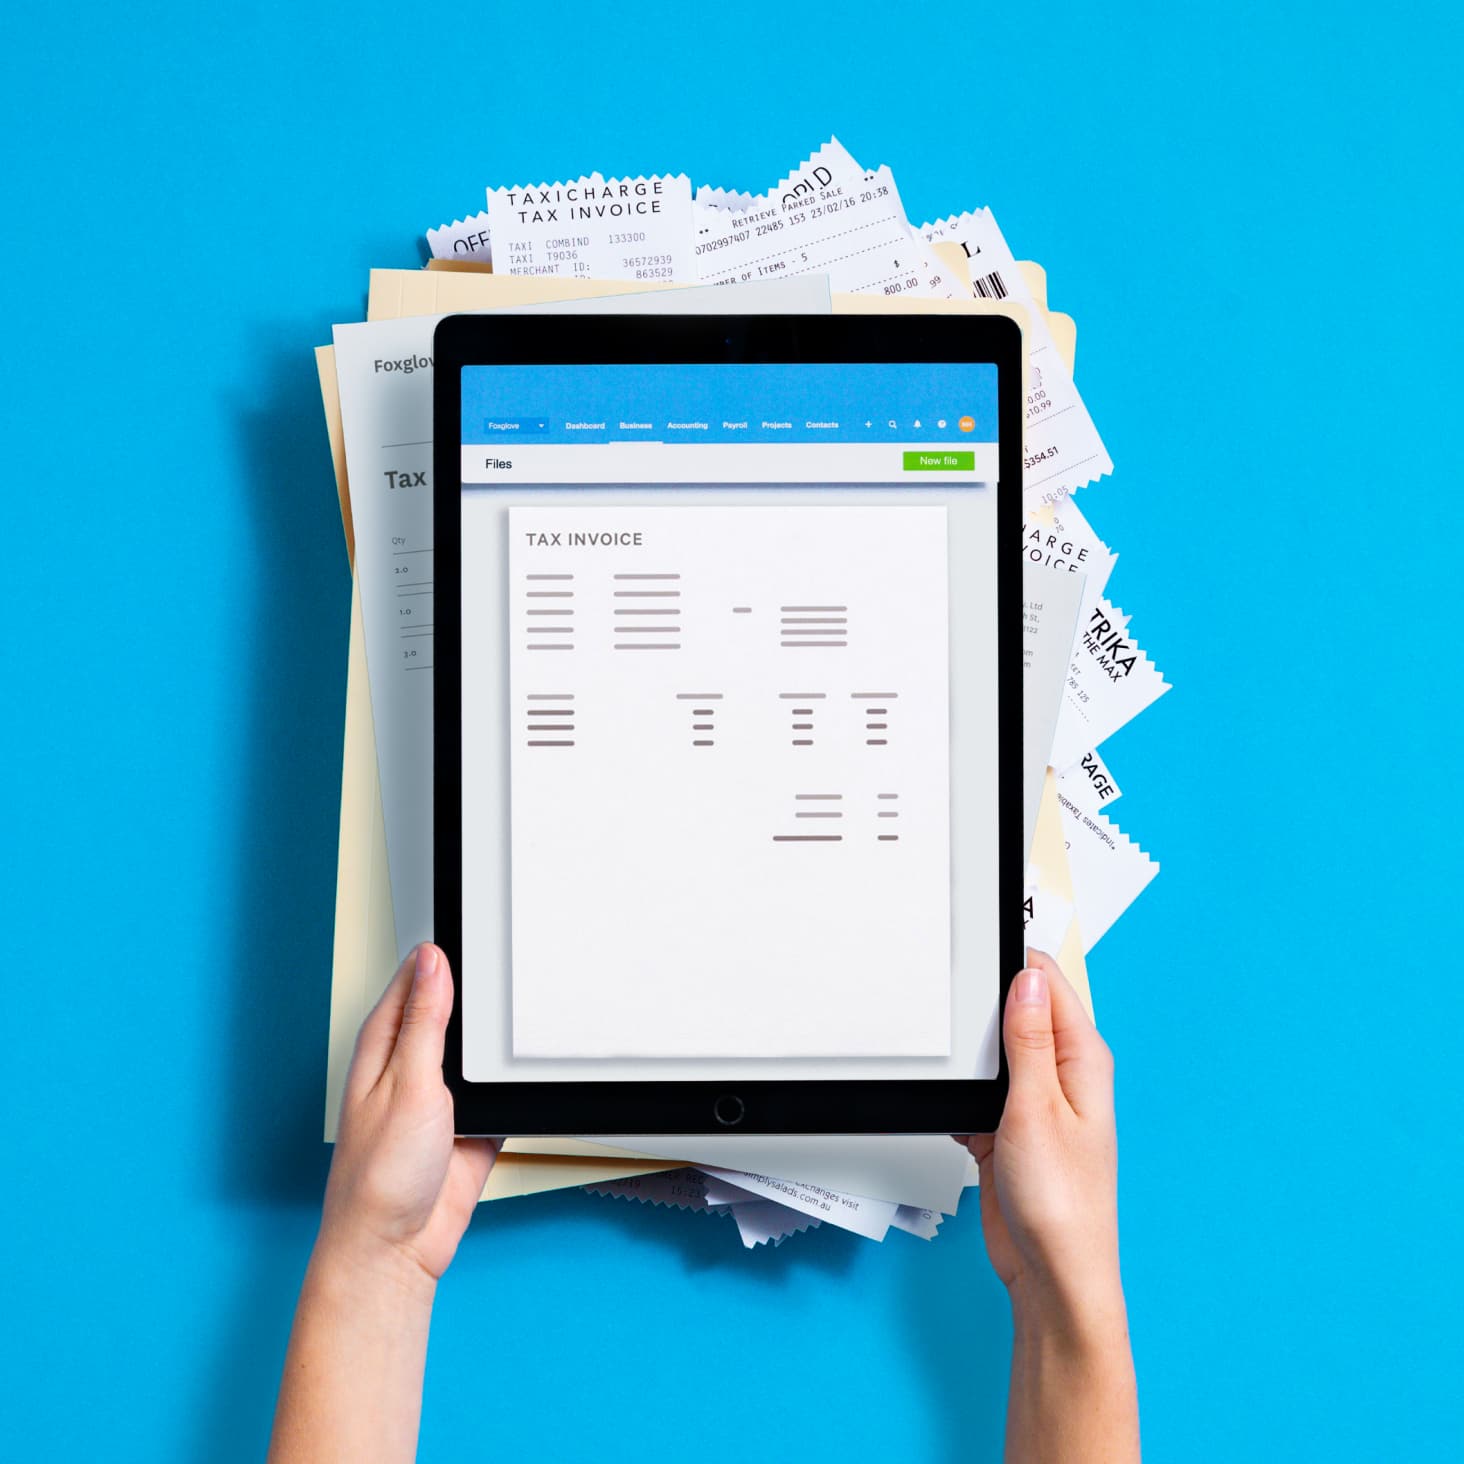 Tax invoice on tablet, categorised for online file storage.